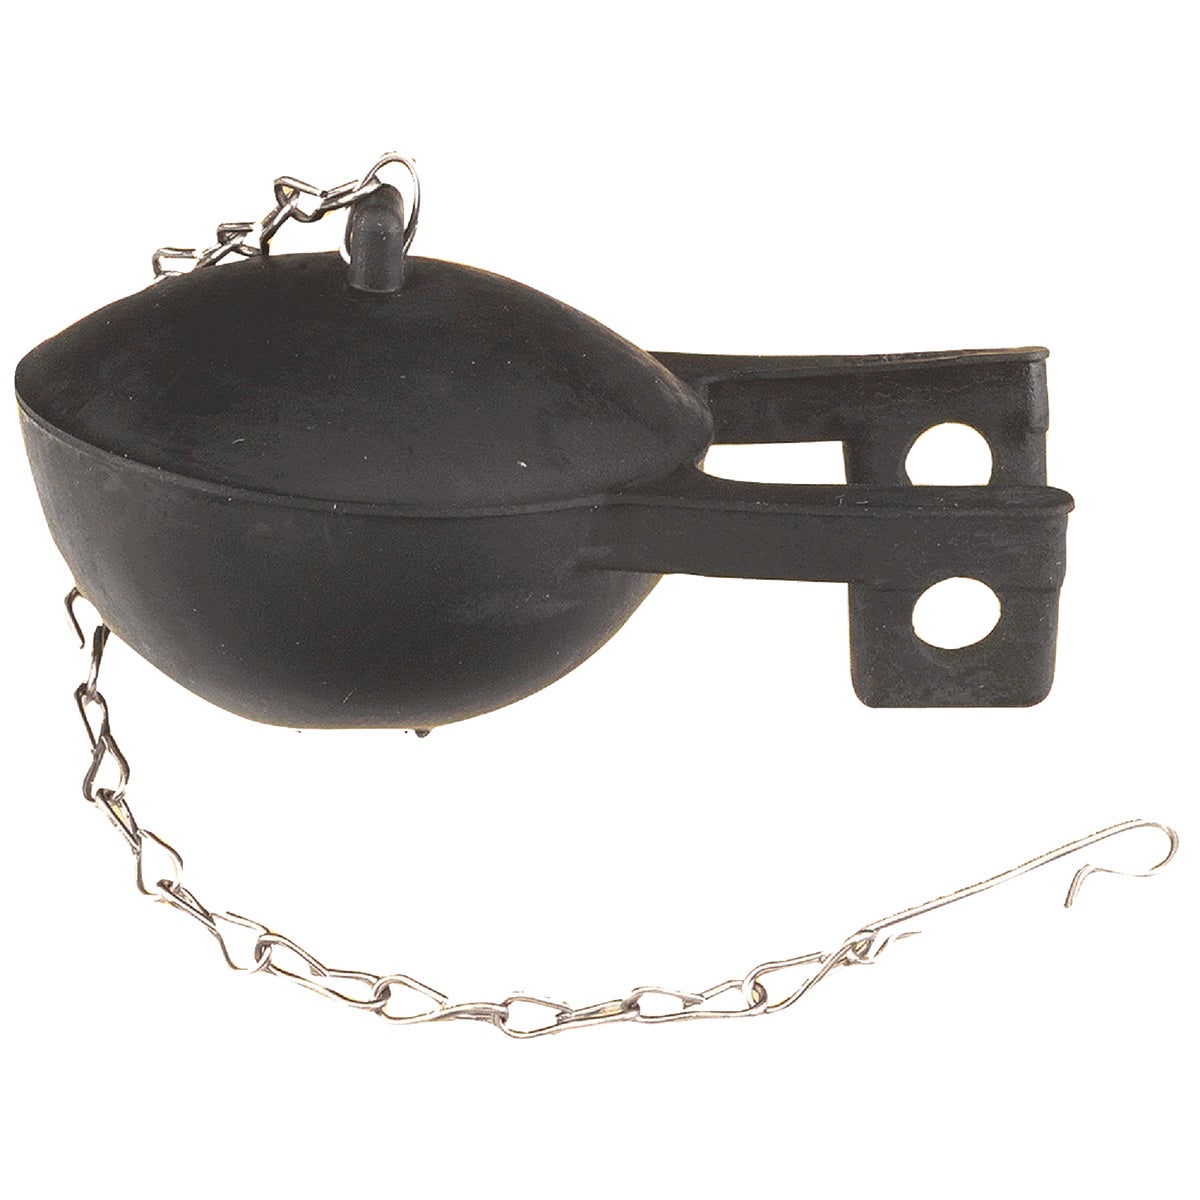 Item 408301, Flapper type made of finest rubber with stainless steel chain.